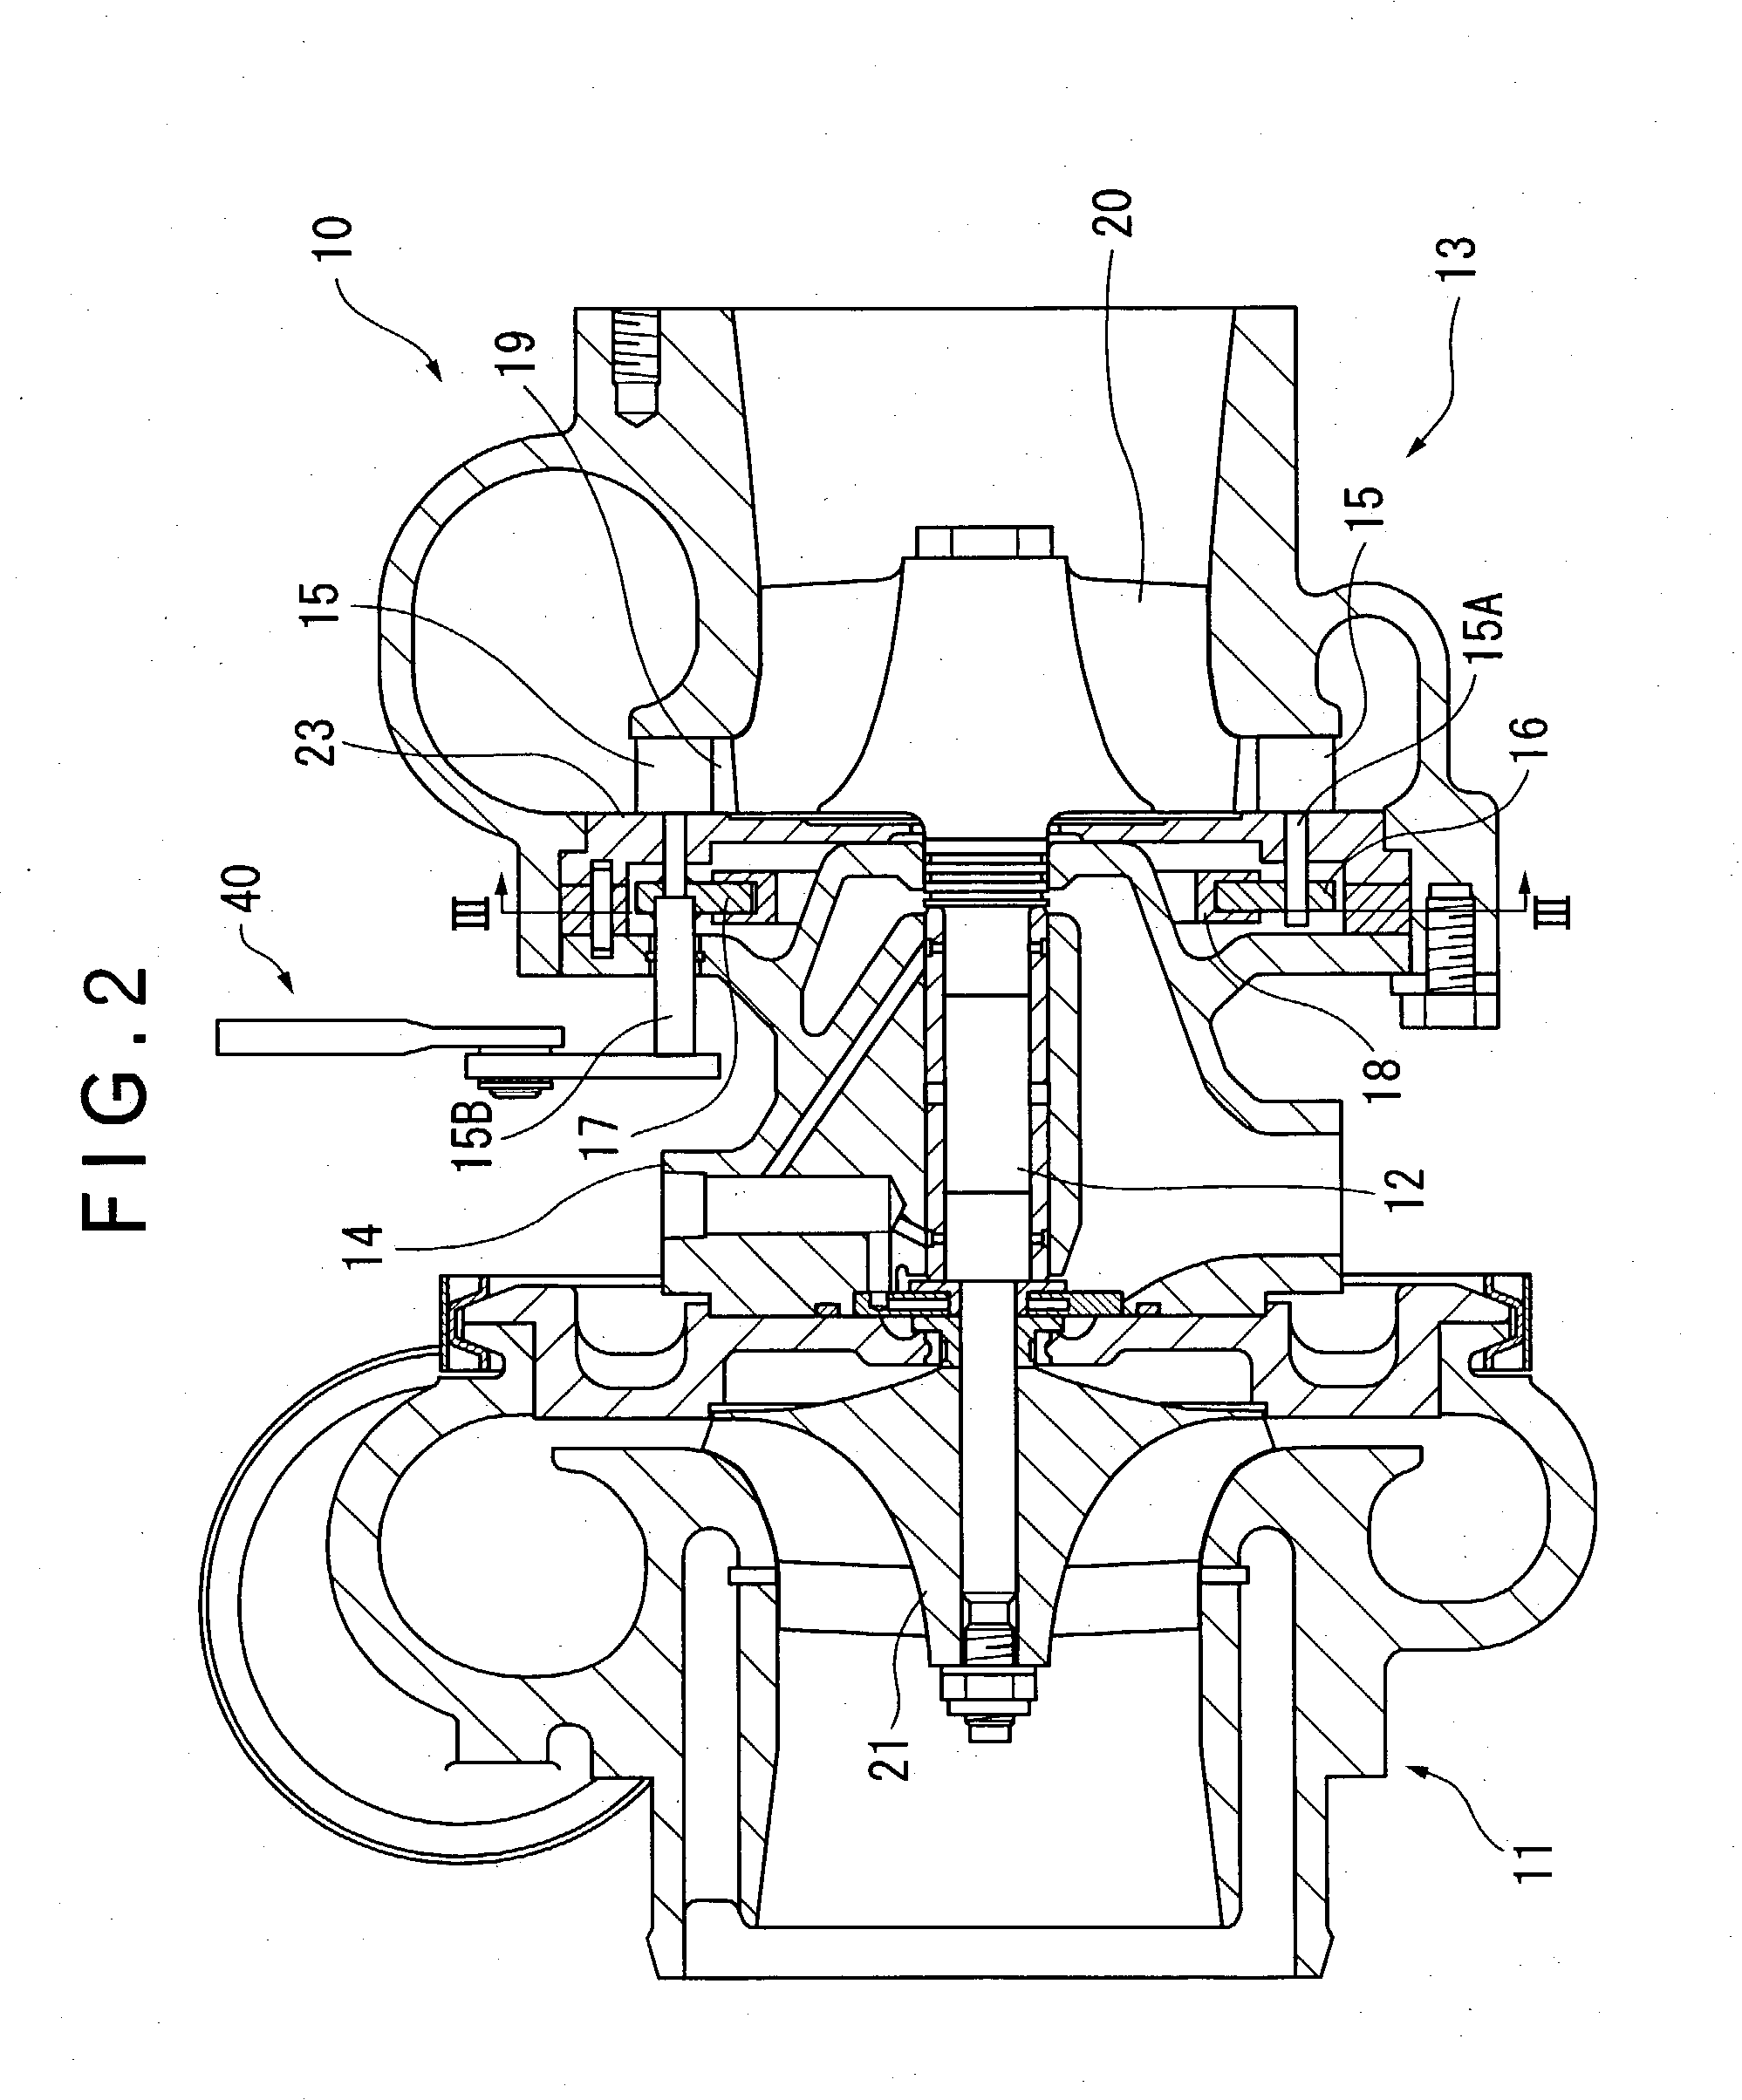 Variable nozzle opening control system for an exhaust turbine supercharger